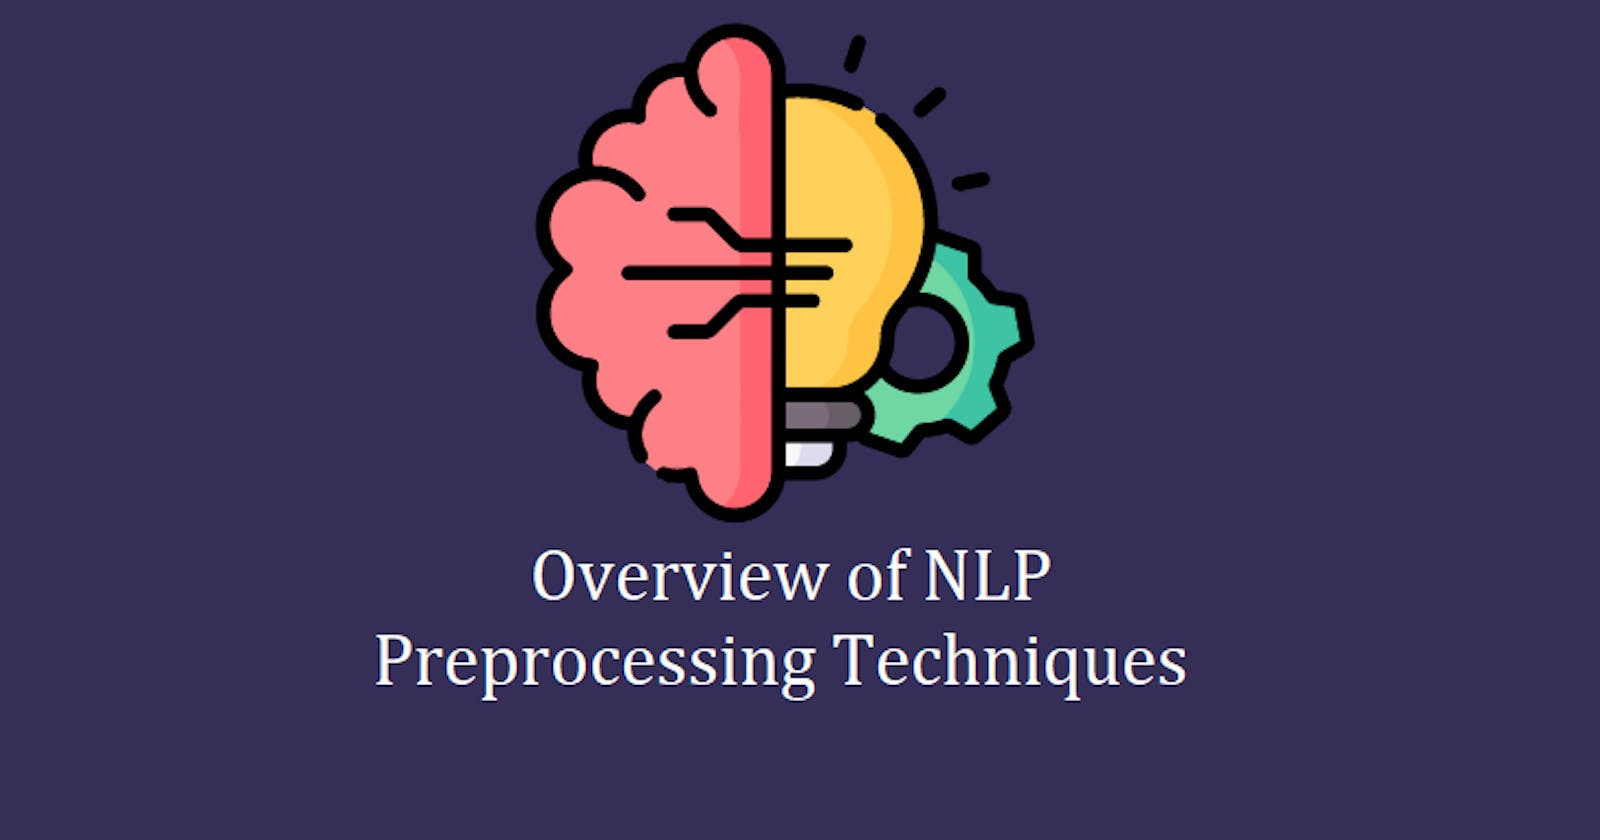 Overview of NLP Preprocessing Techniques